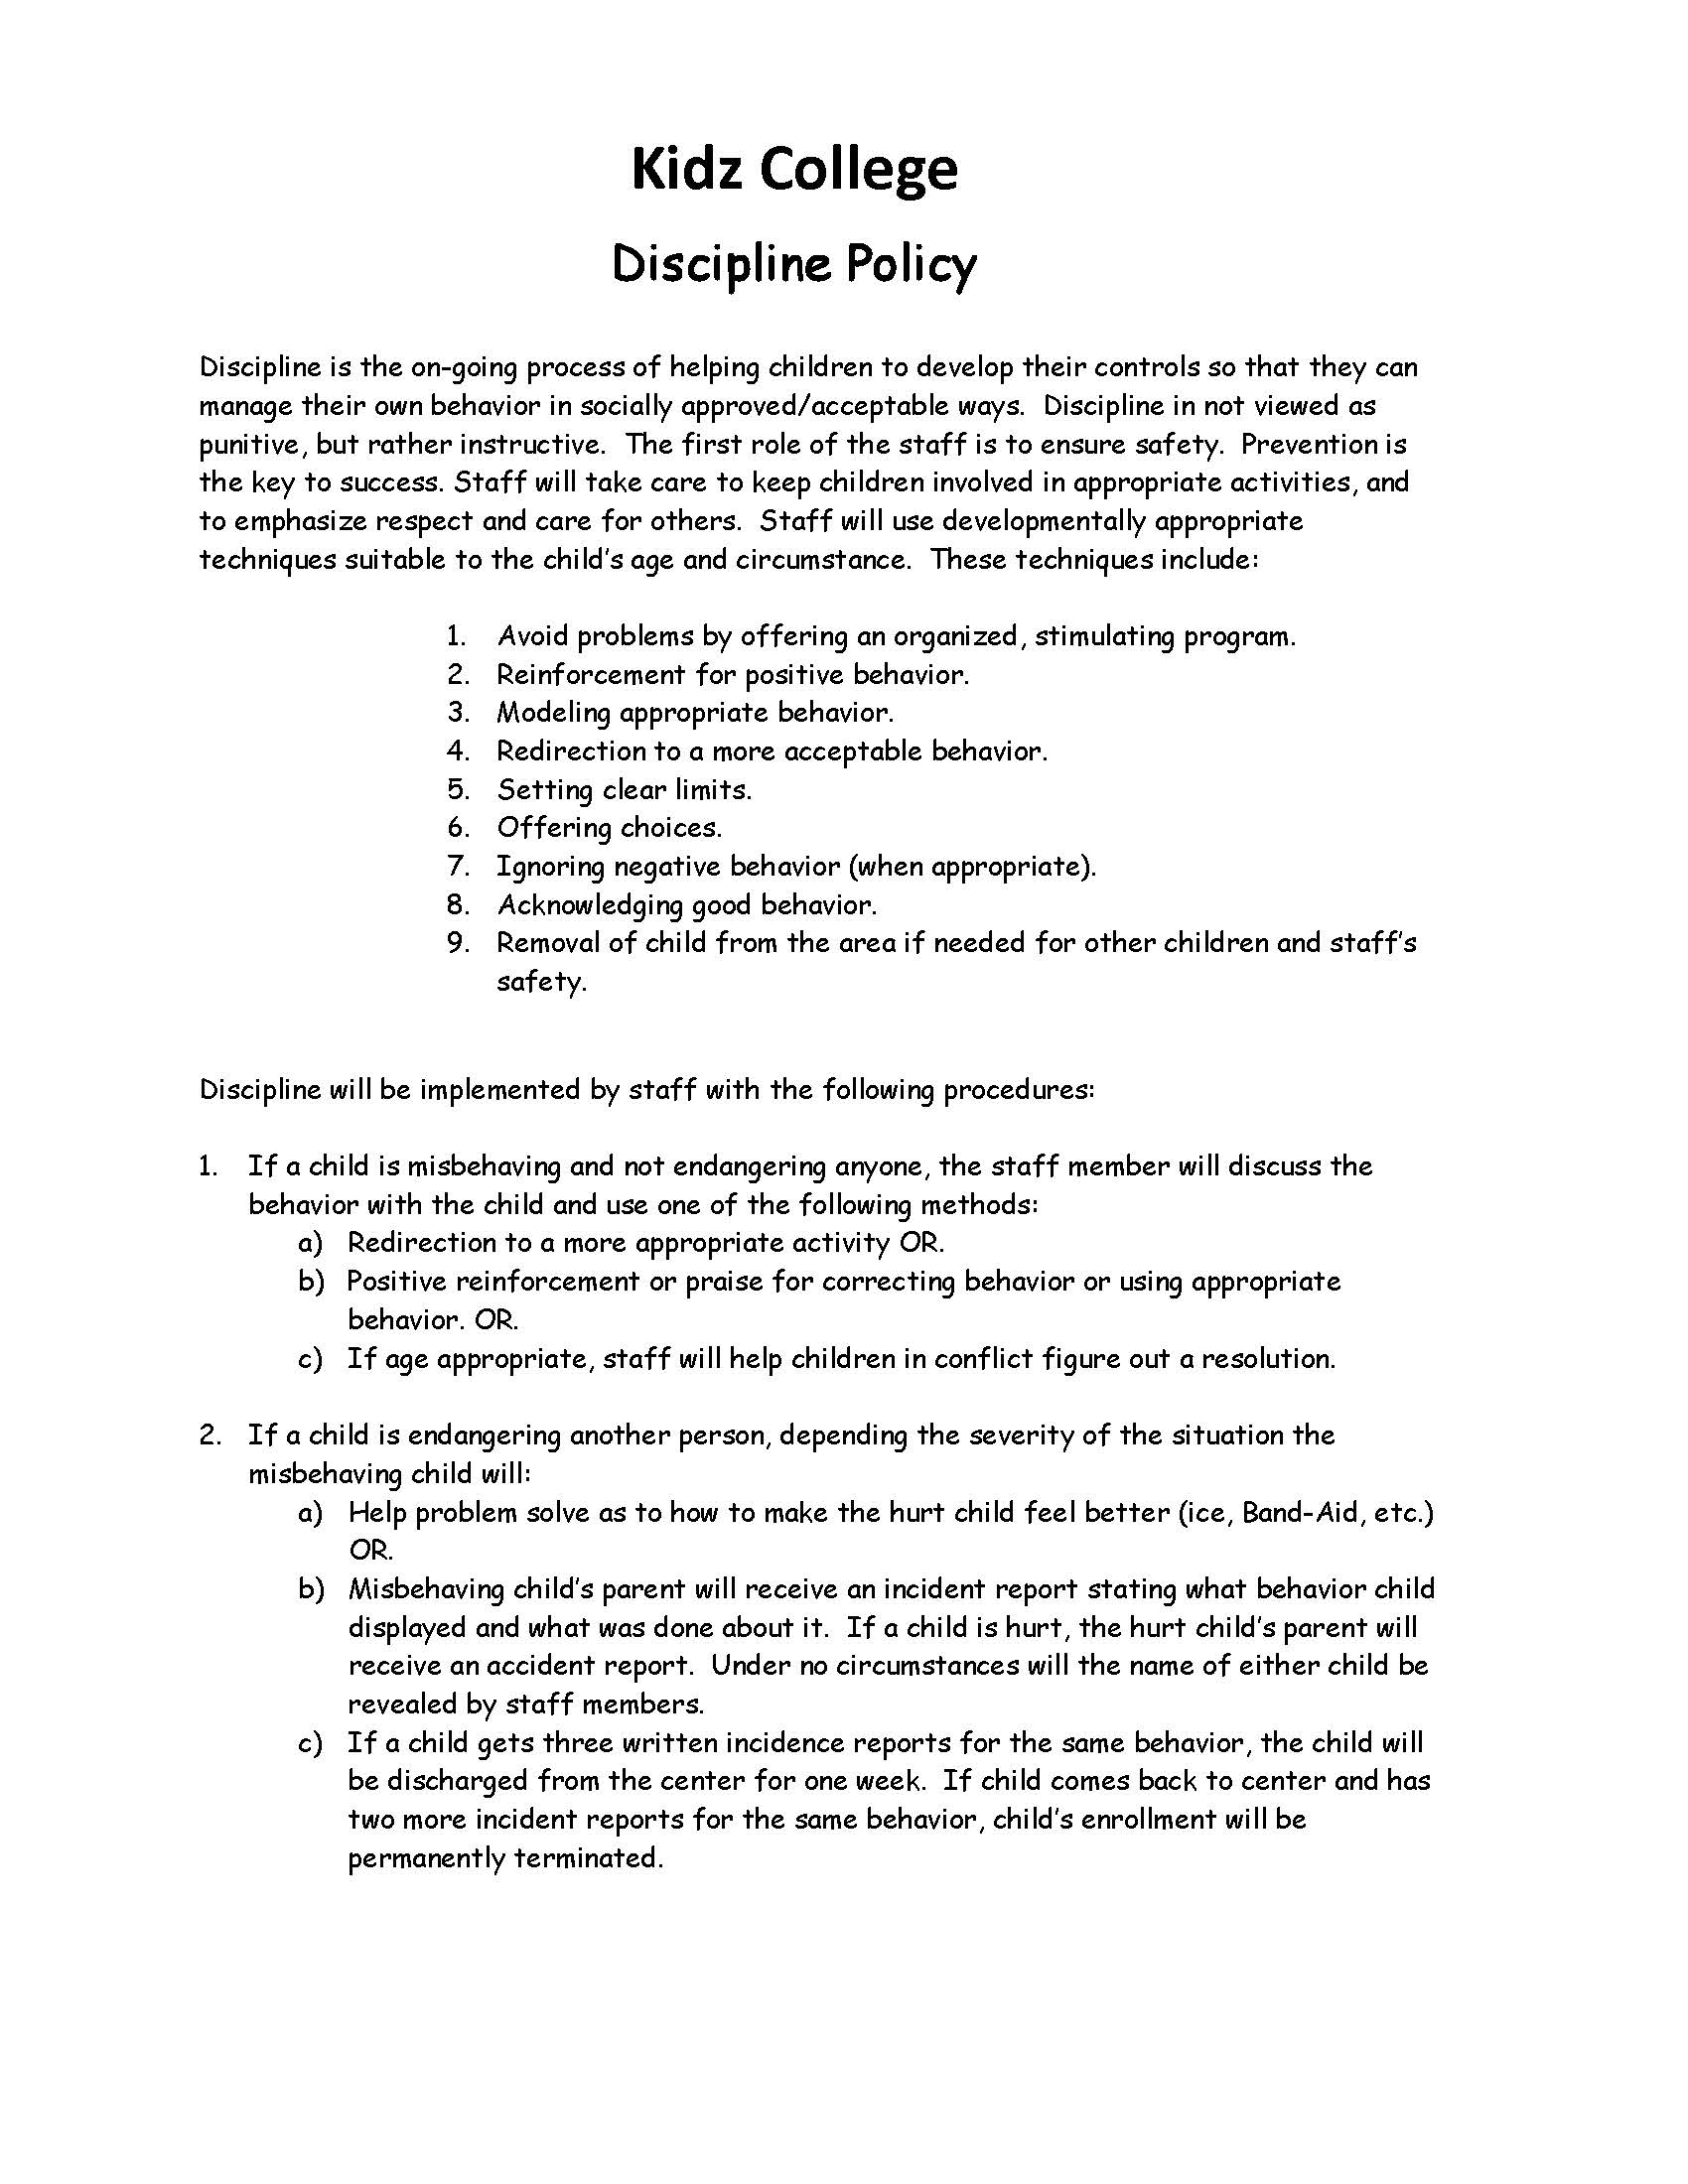 Discipline Policy 1 of 2